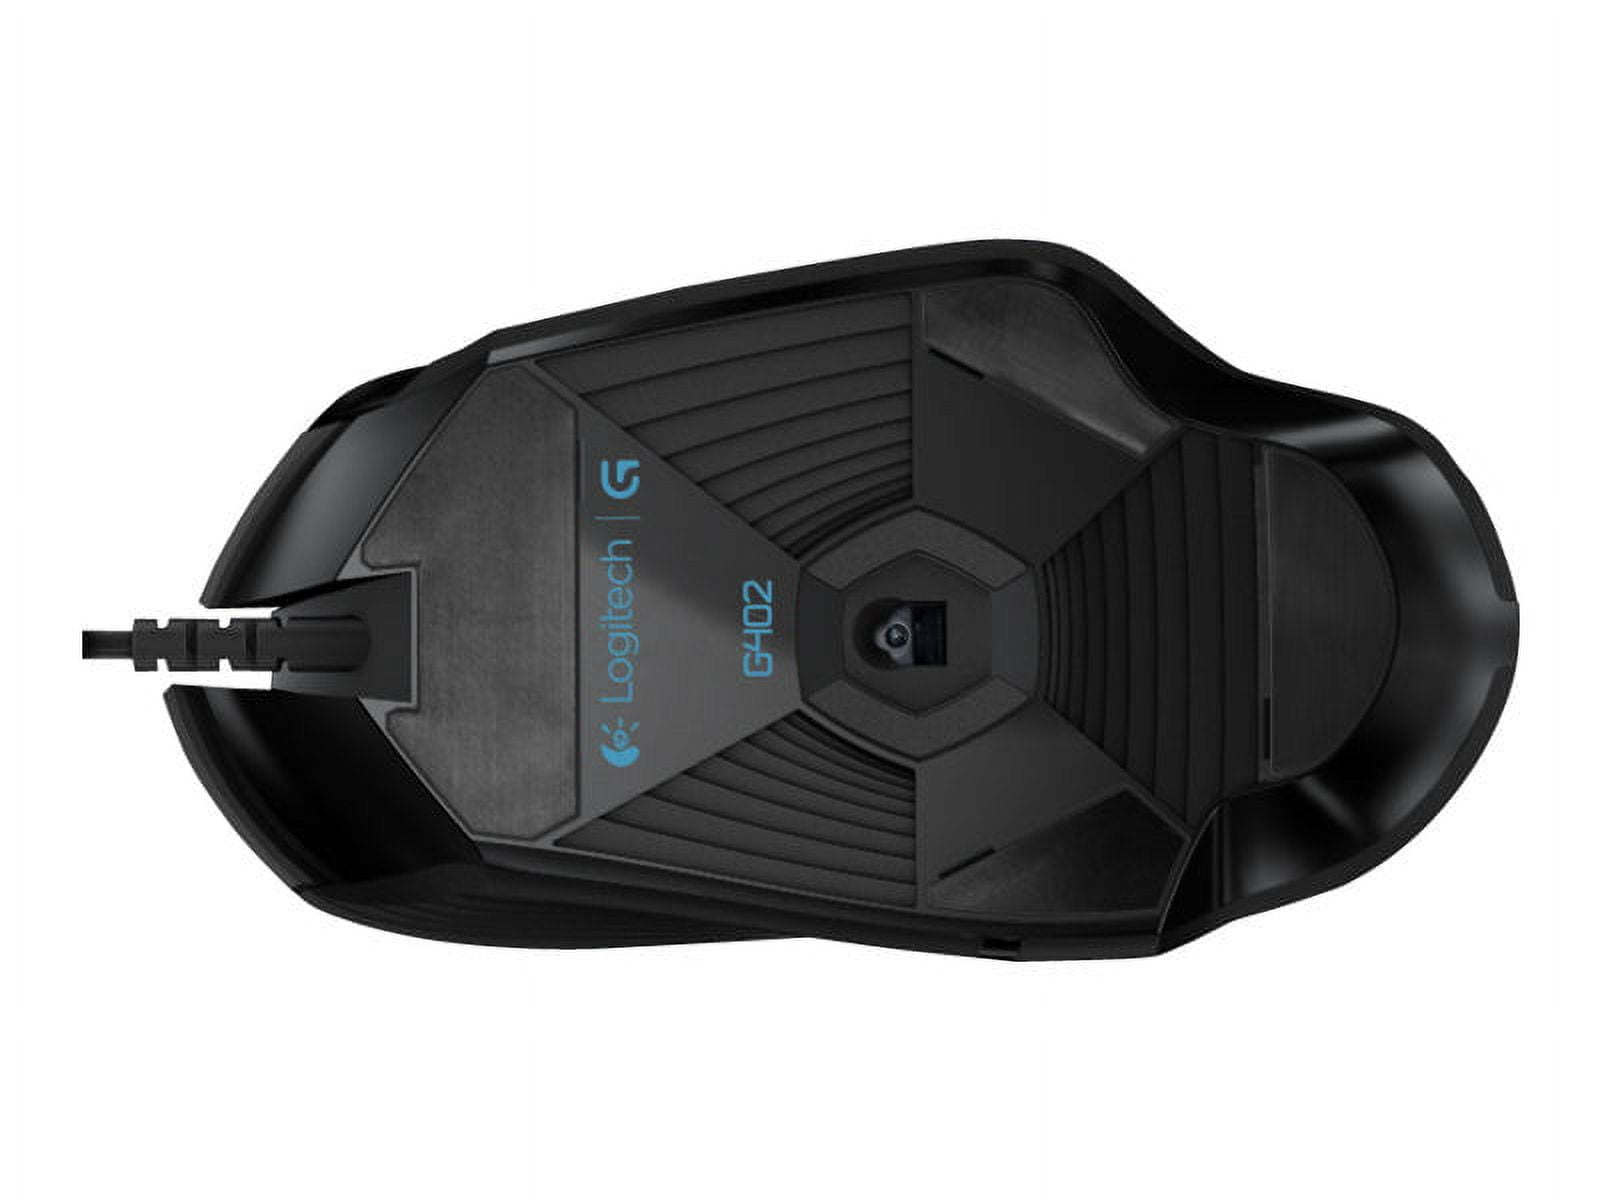  Logitech G402 Hyperion Fury Wired Gaming Mouse, 4,000 DPI,  Lightweight, 8 Programmable Buttons, Compatible with PC/Mac - Black : Video  Games